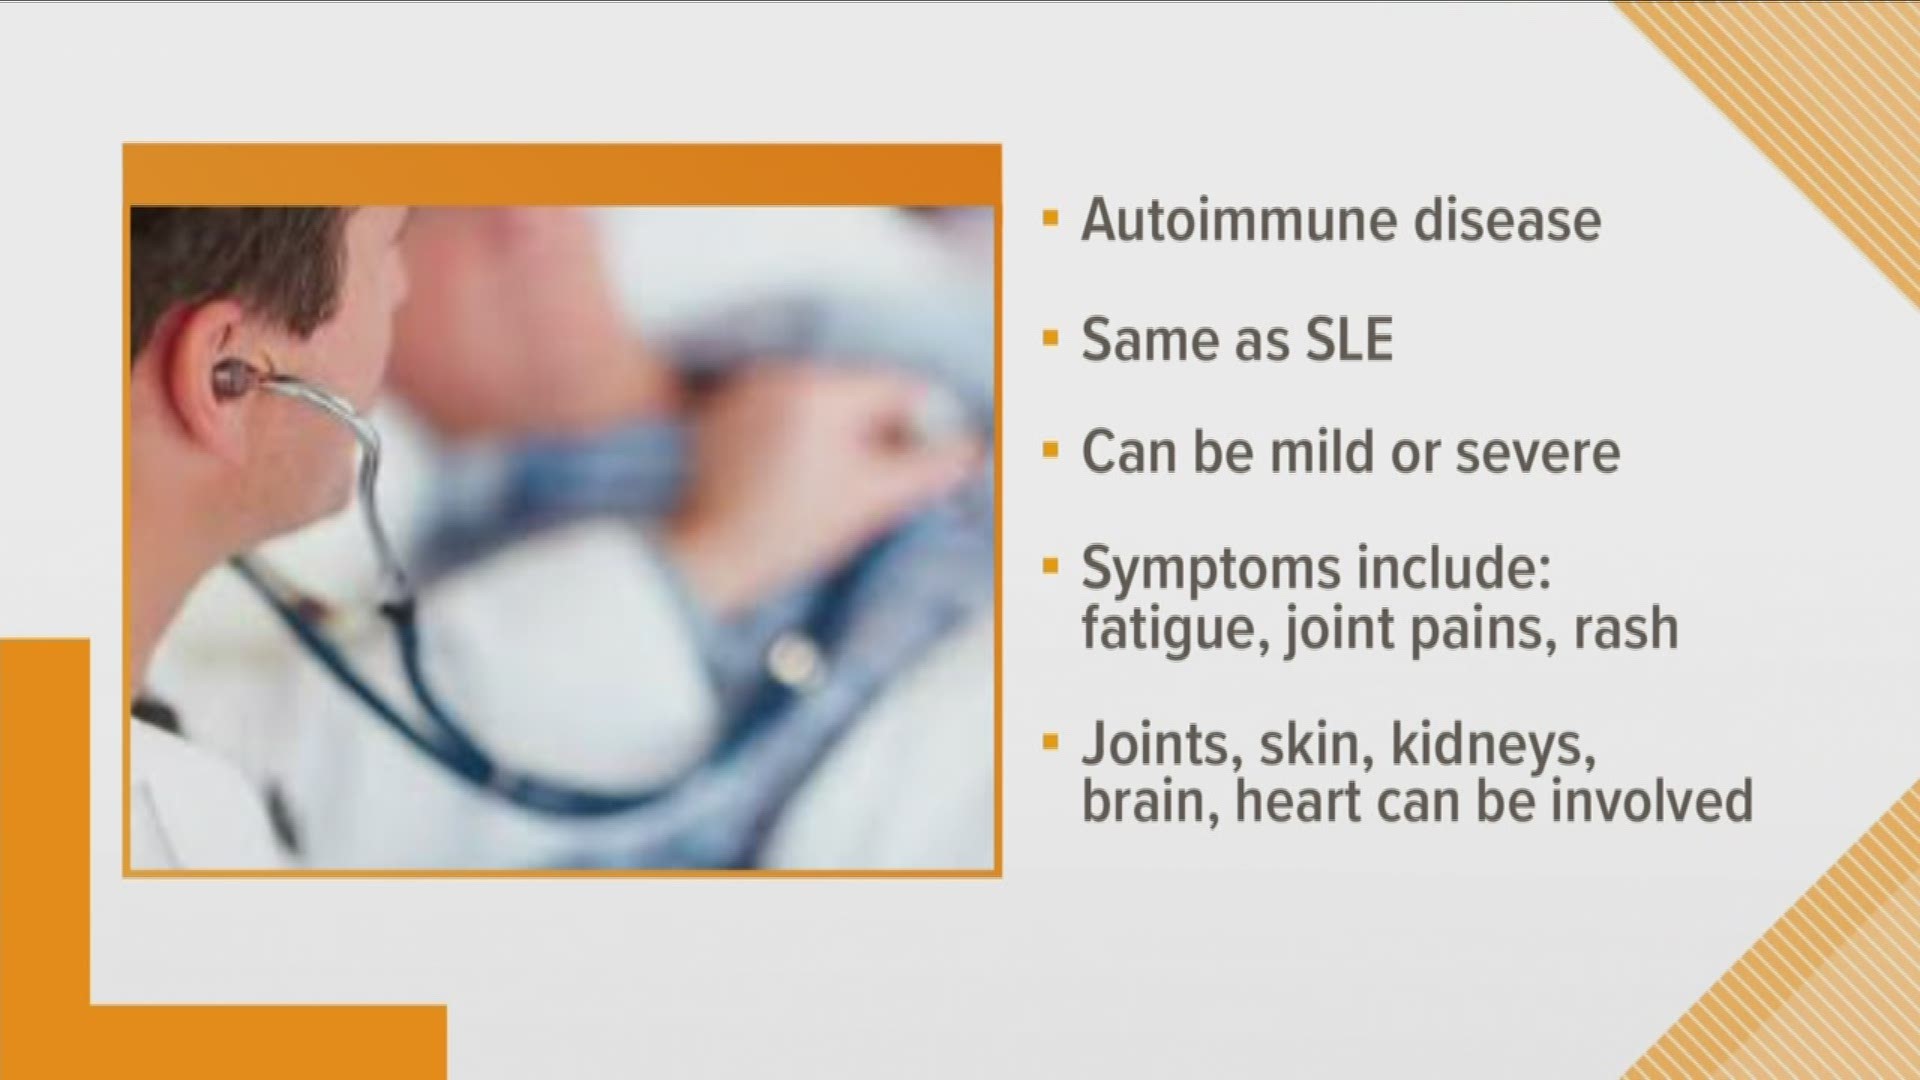 Dr. Bob is here to talk about the symptoms and treatments of Lupus, an autoimmune illness.